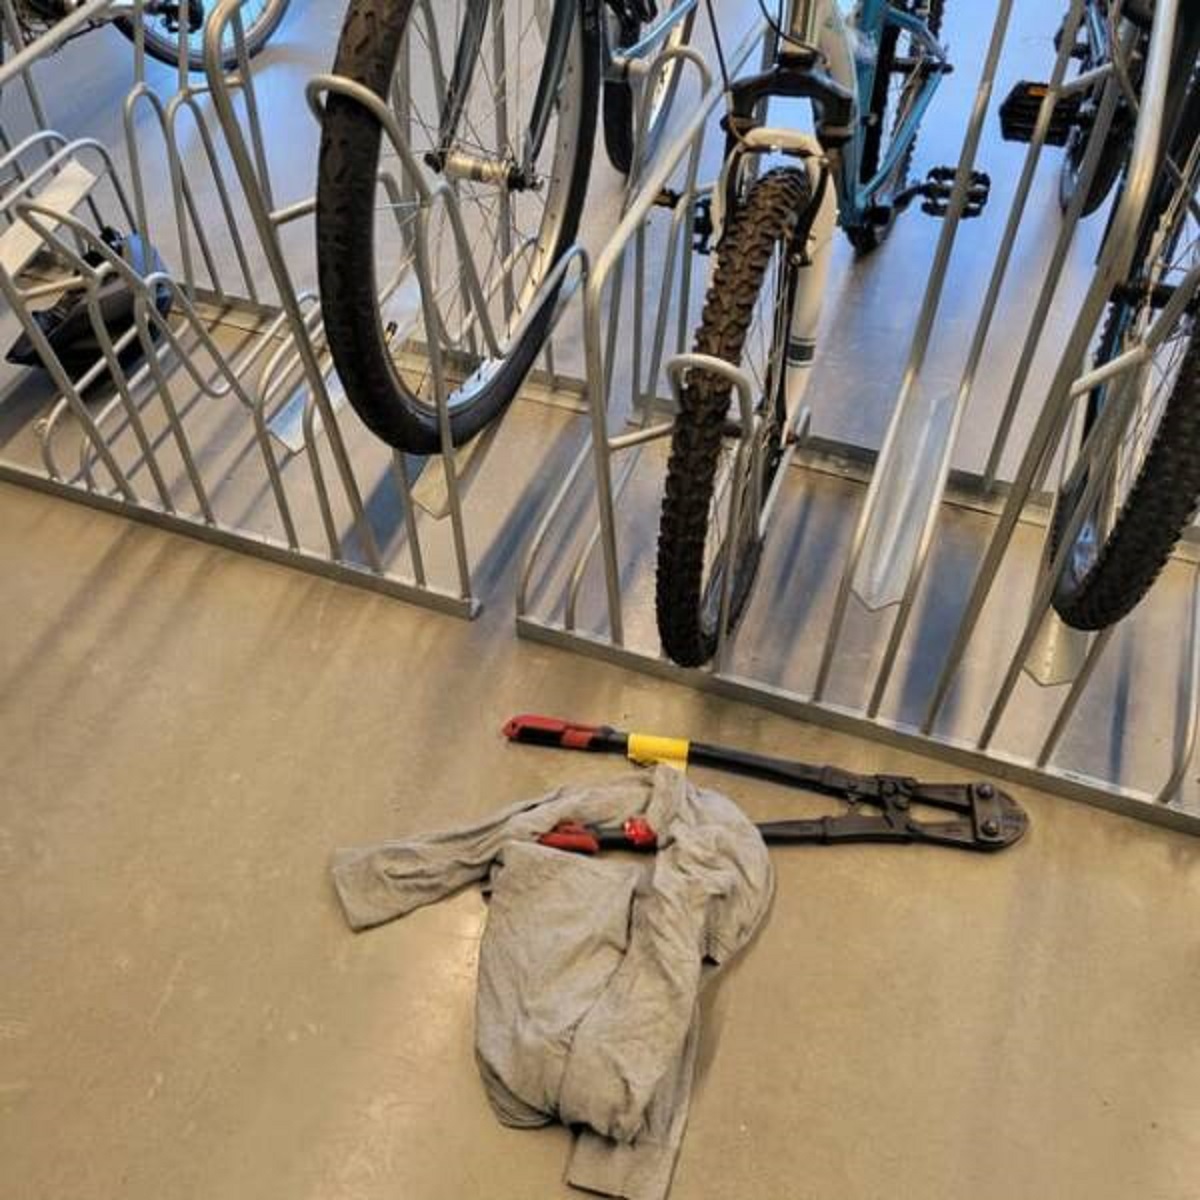 "Bought a $2500 e-bike two weeks ago. Locked it up in my apartment building's "secure storage room". Walked downstairs today to see this where my bike was"